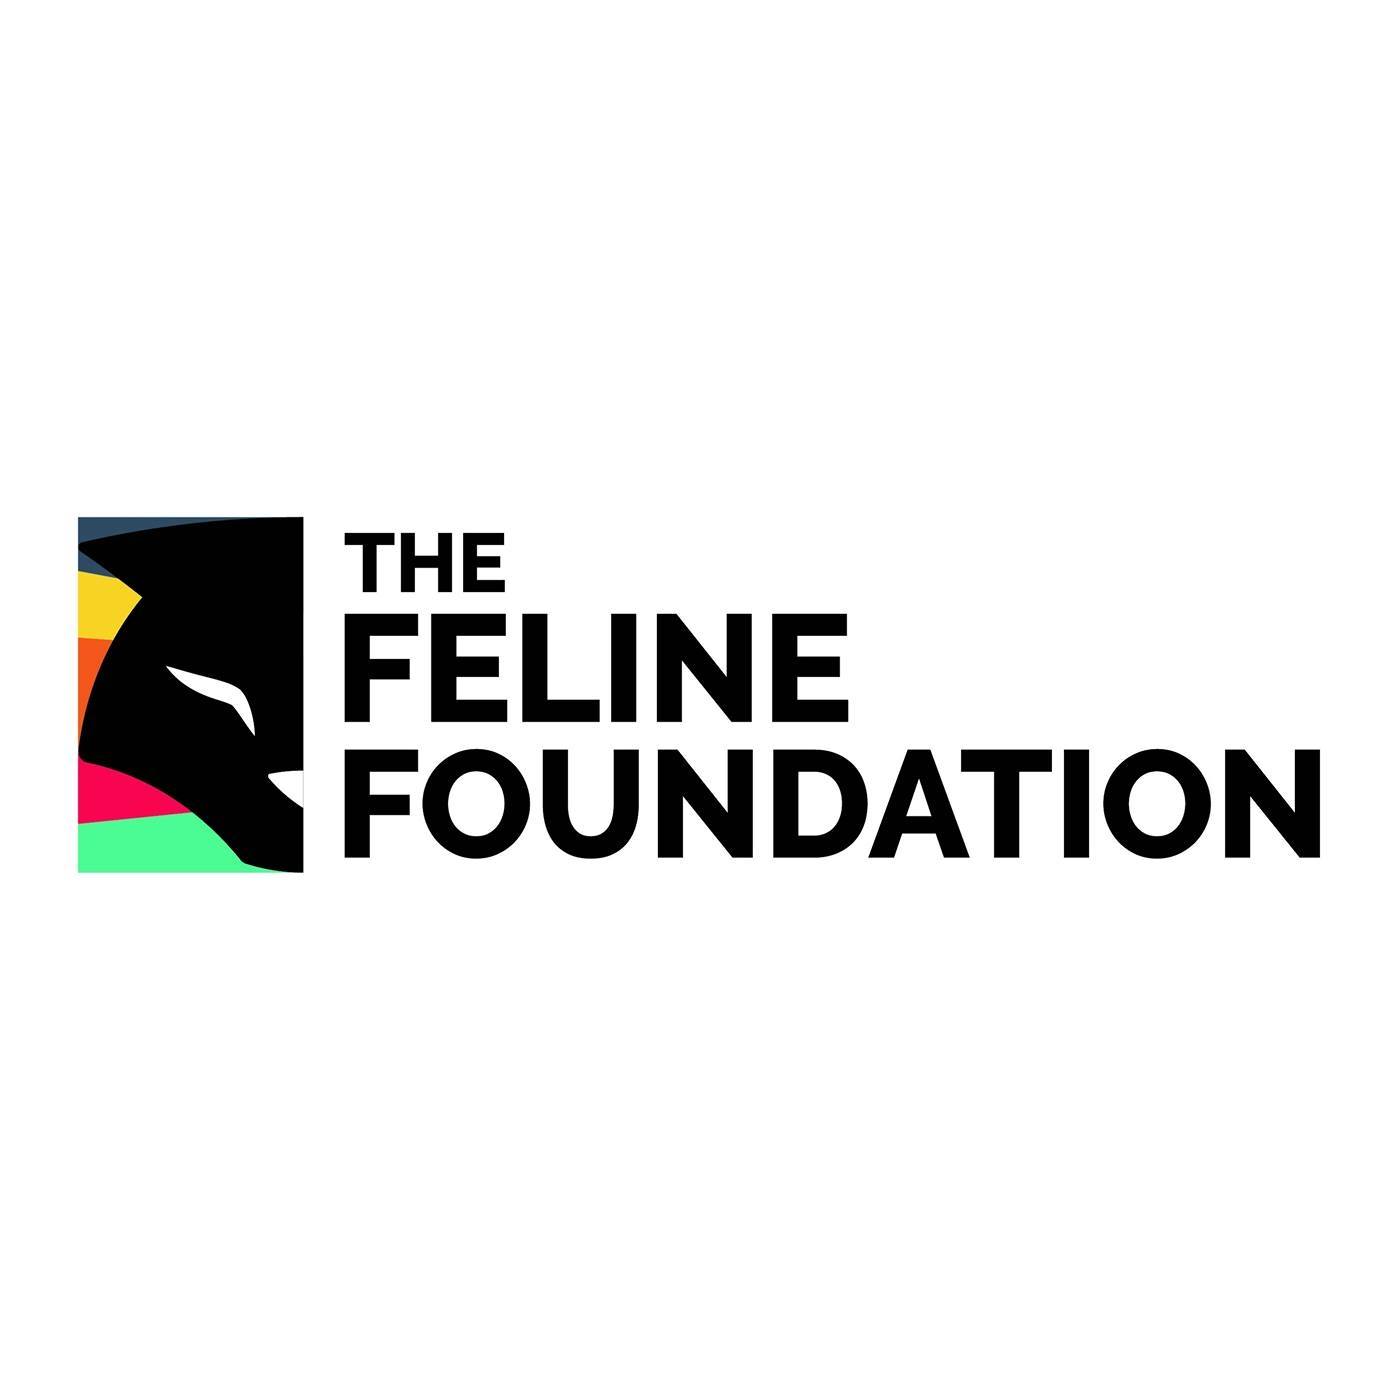 The Feline Foundation Community Veterinary Clinic and Pet Store|Diagnostic centre|Medical Services